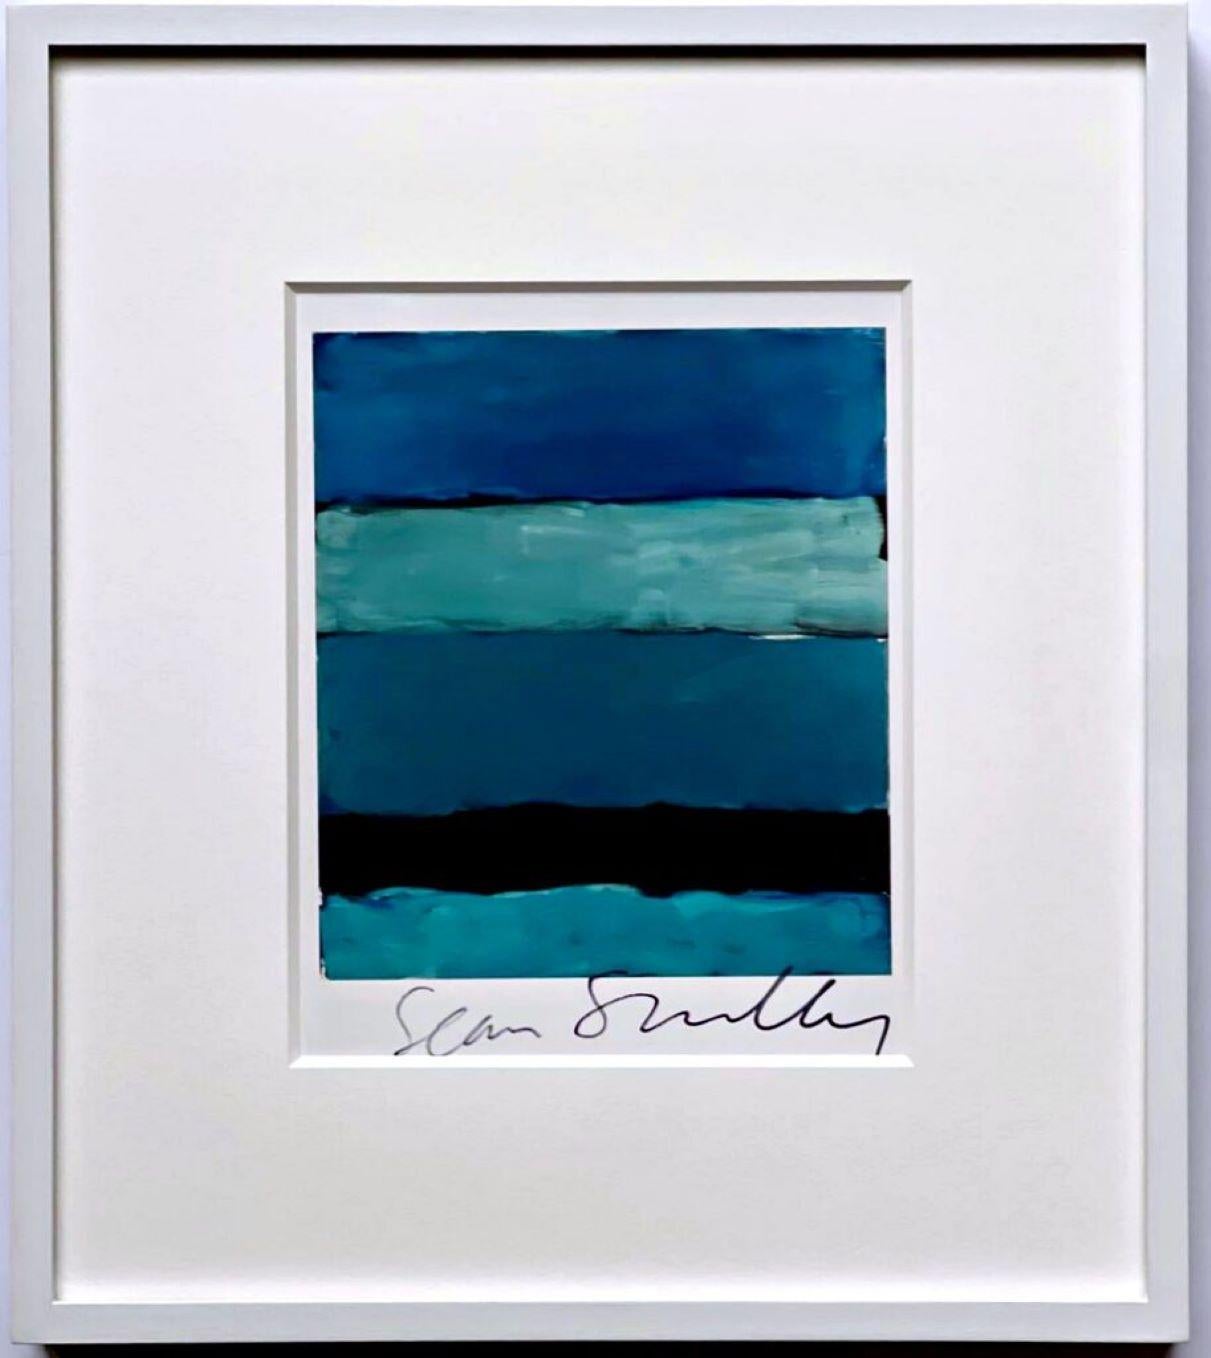 Landline, offset lithograph card (hand signed by Sean Scully) - Framed